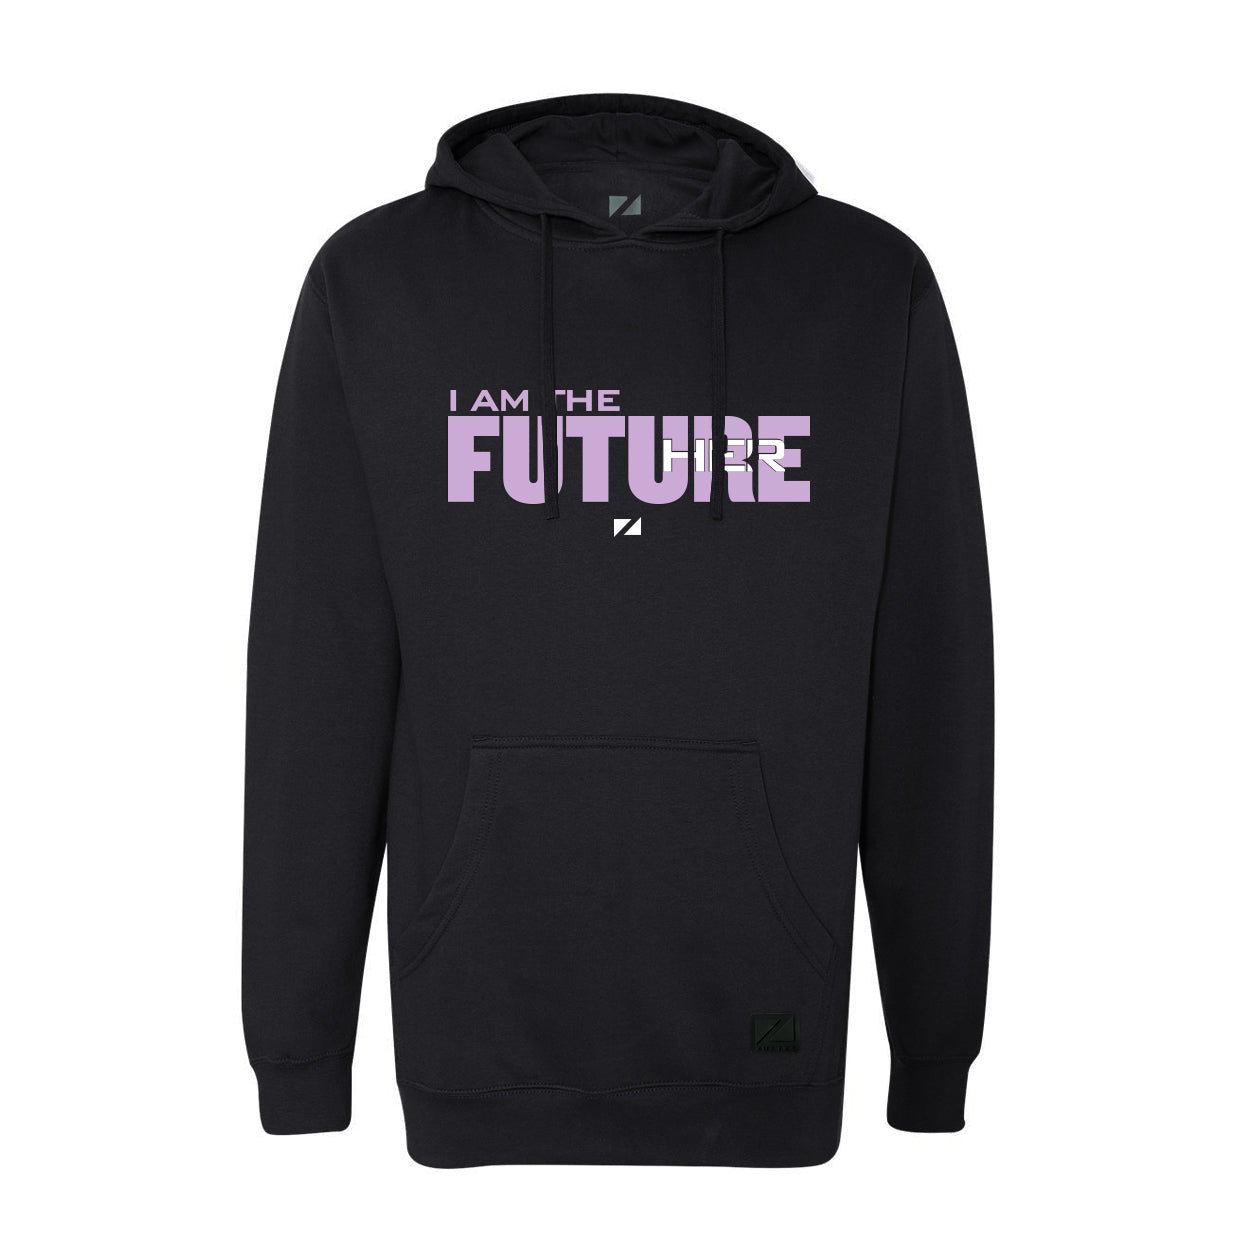 I am the Future - Her - Hoodie